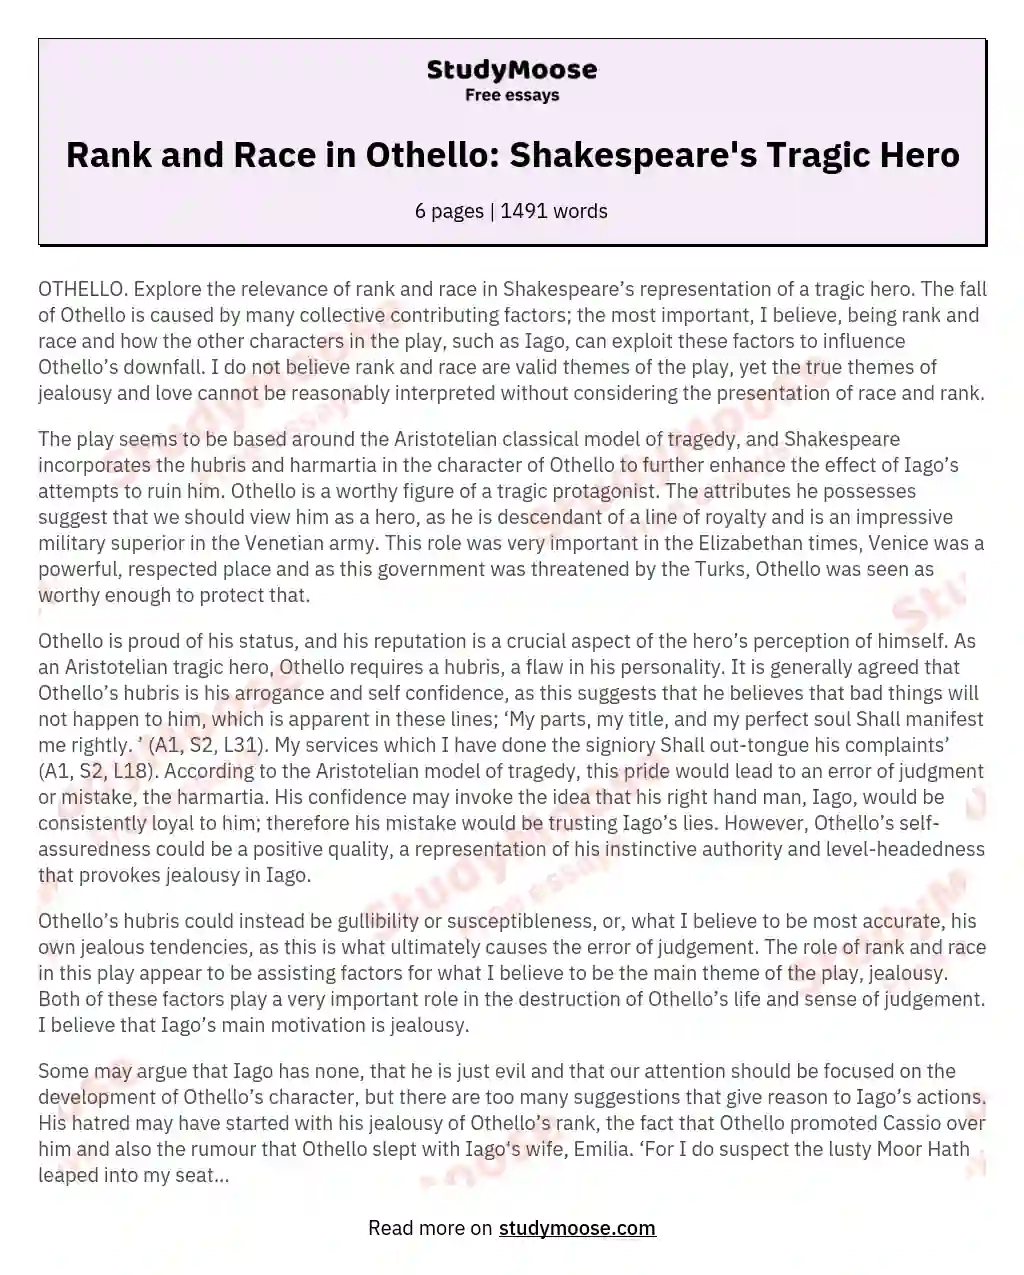 Othello - Explore the Relevance of Rank and Race in Shakespeare’s Representation of a Tragic Hero.